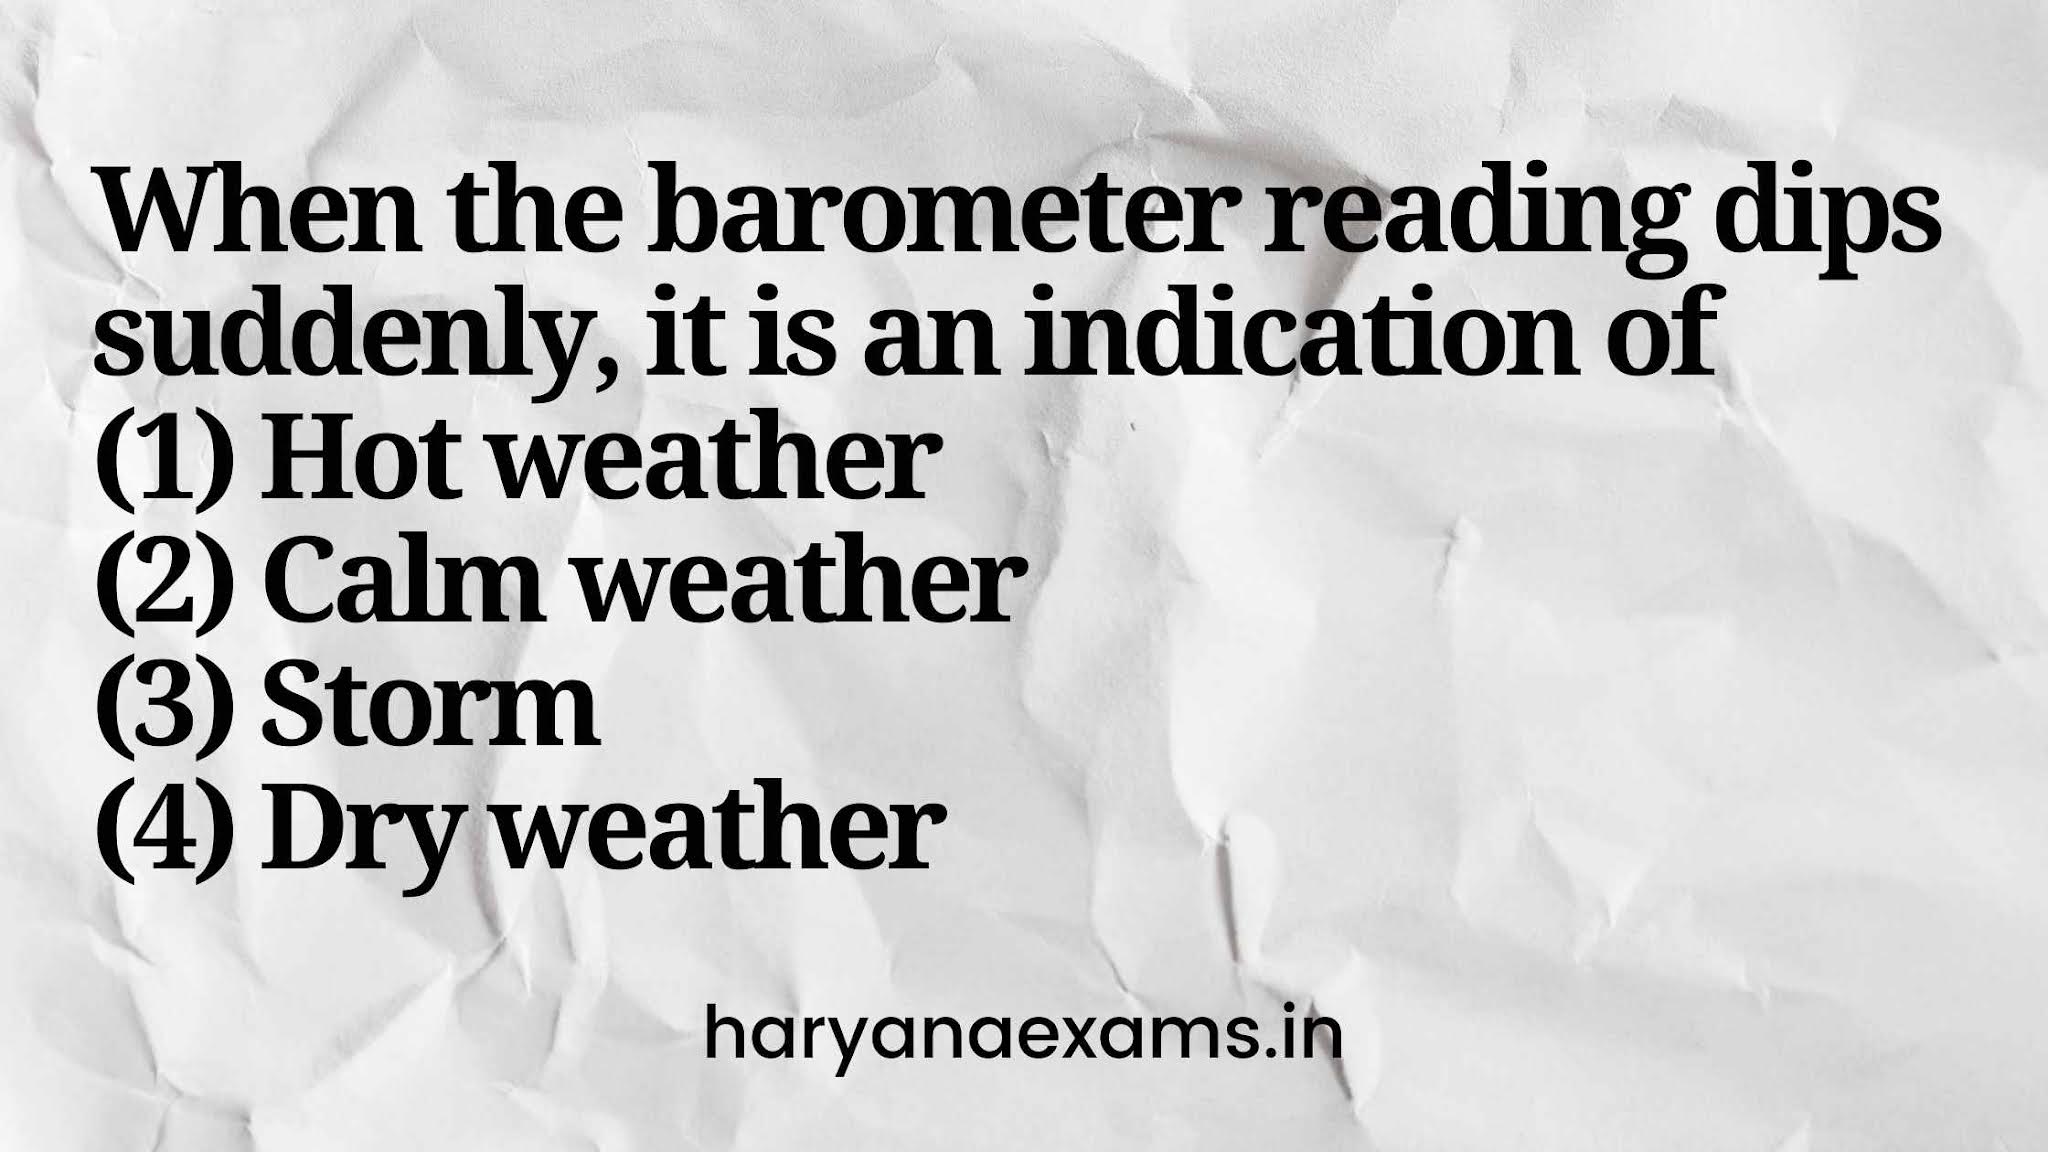 When the barometer reading dips suddenly, it is an indication of   (1) Hot weather   (2) Calm weather   (3) Storm   (4) Dry weather